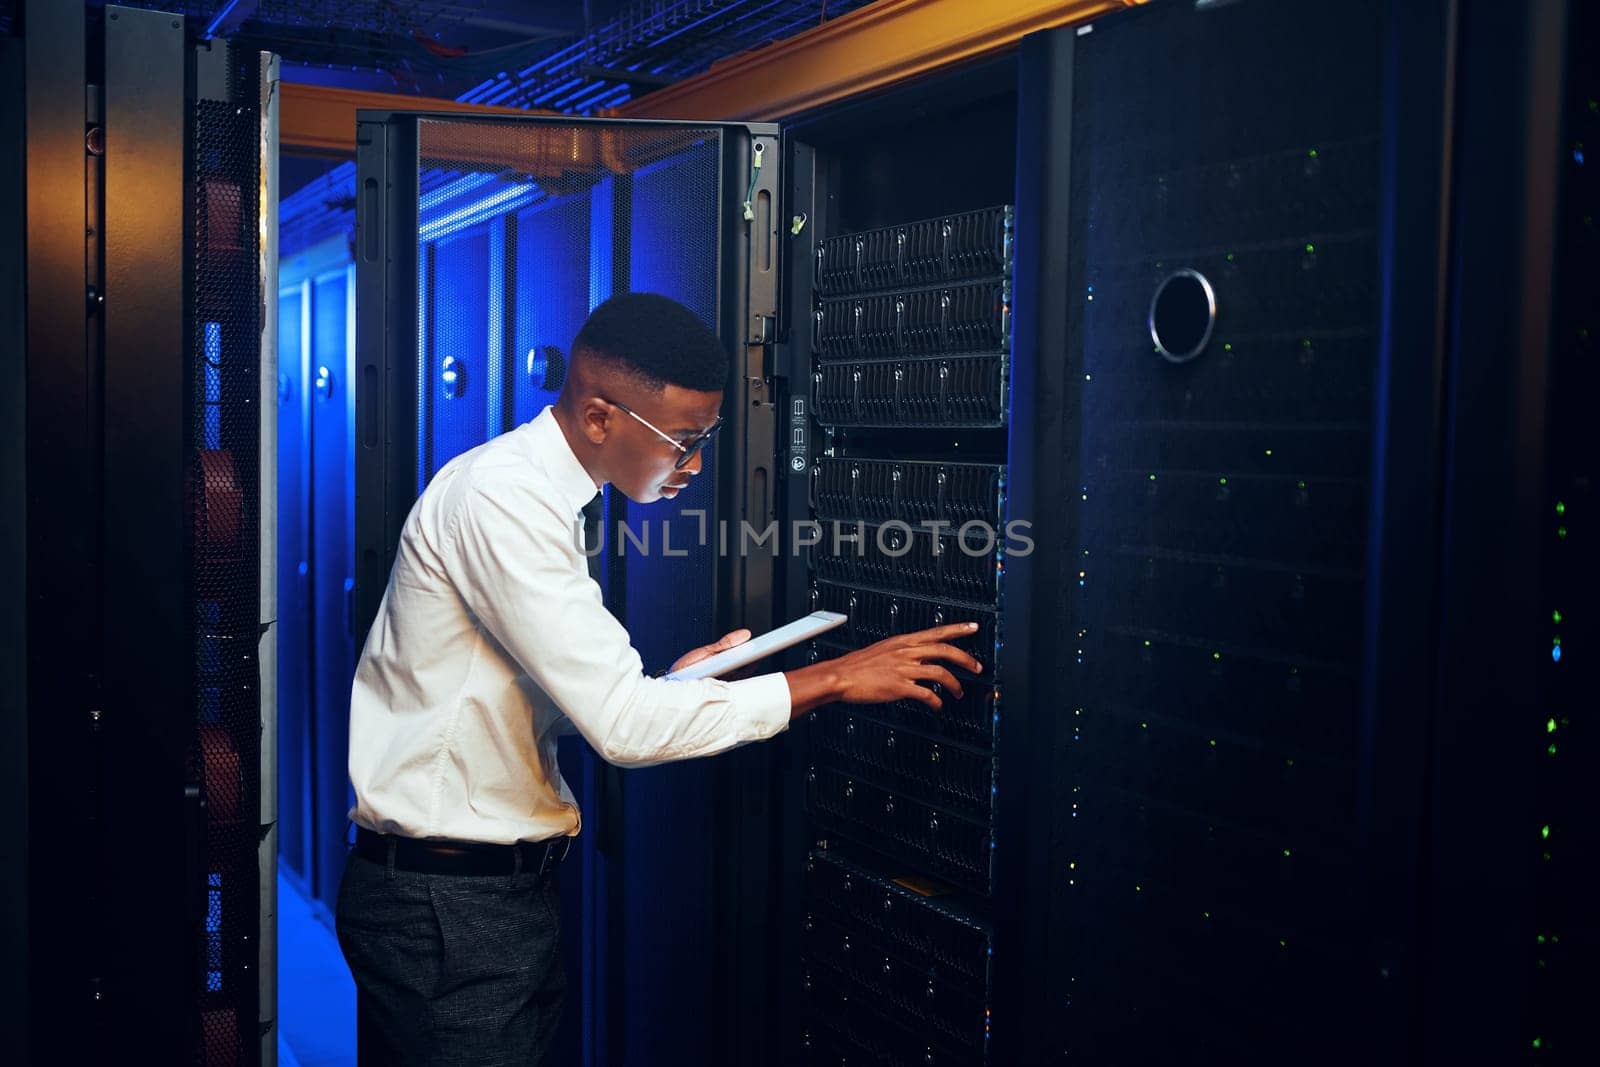 Going about the days inspections. a young man using a digital tablet while working in a server room